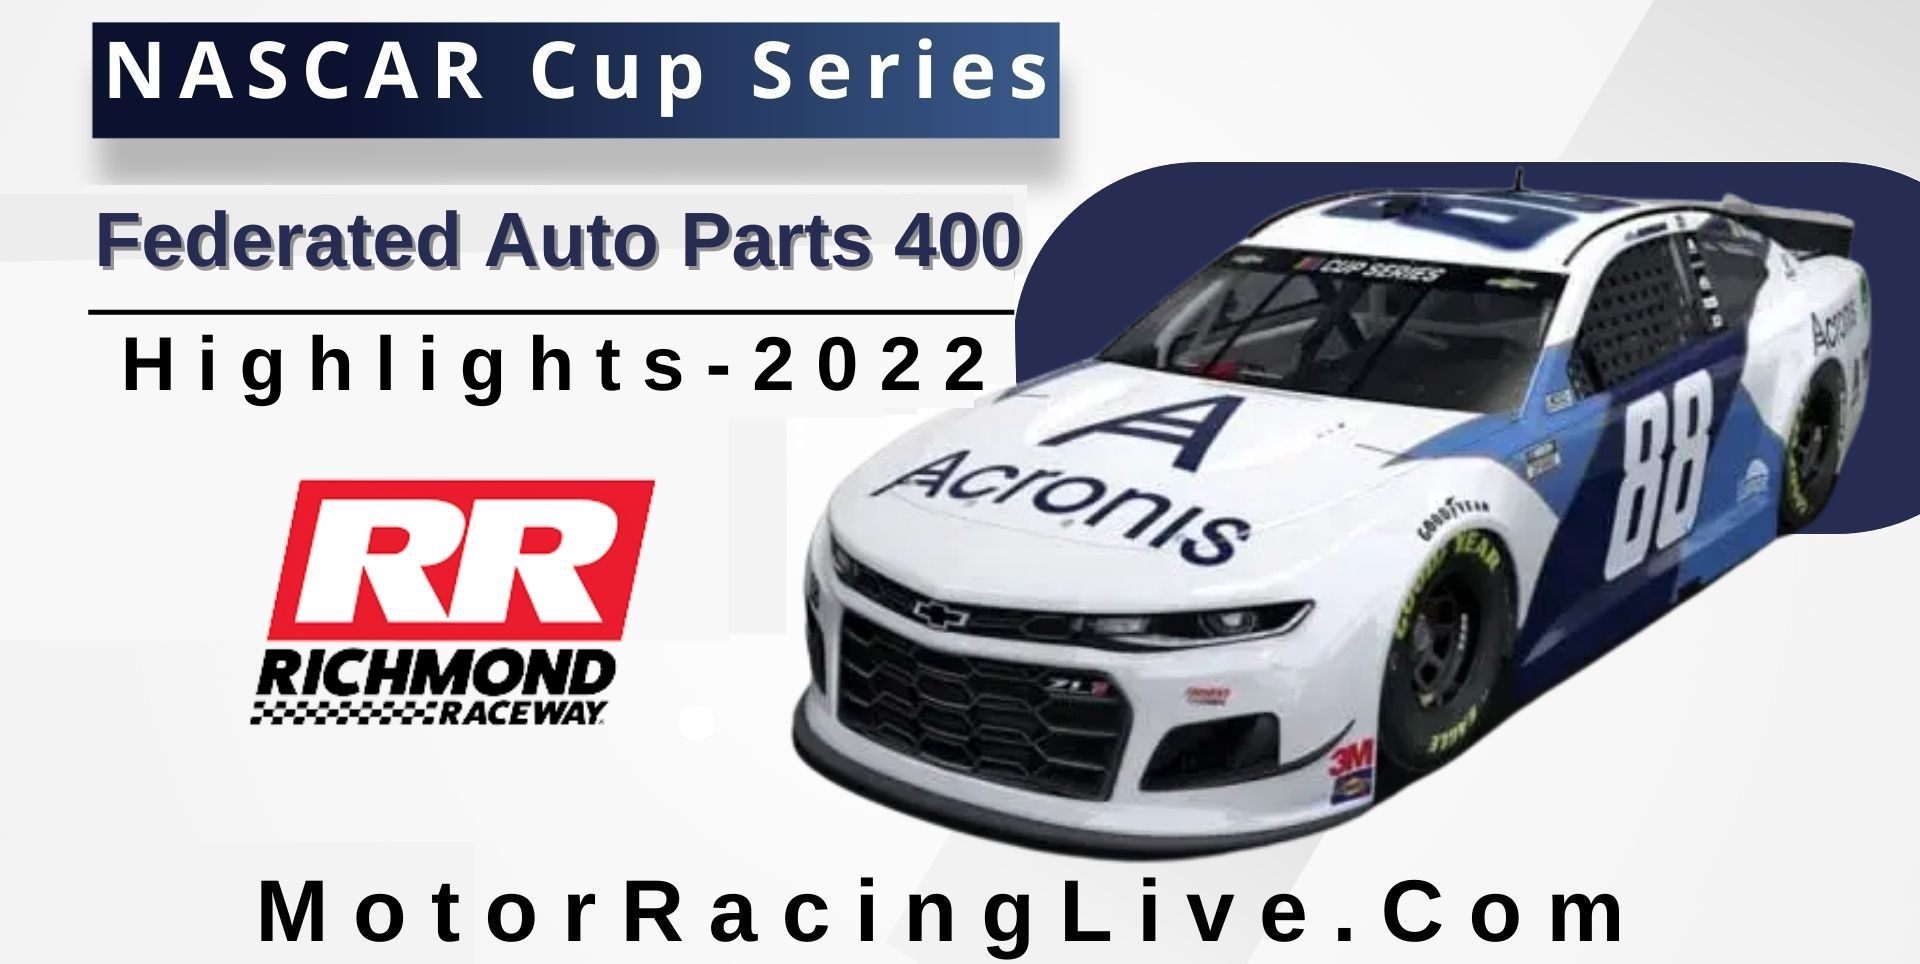 Federated Auto Parts 400 Highlights 2022 NASCAR Cup